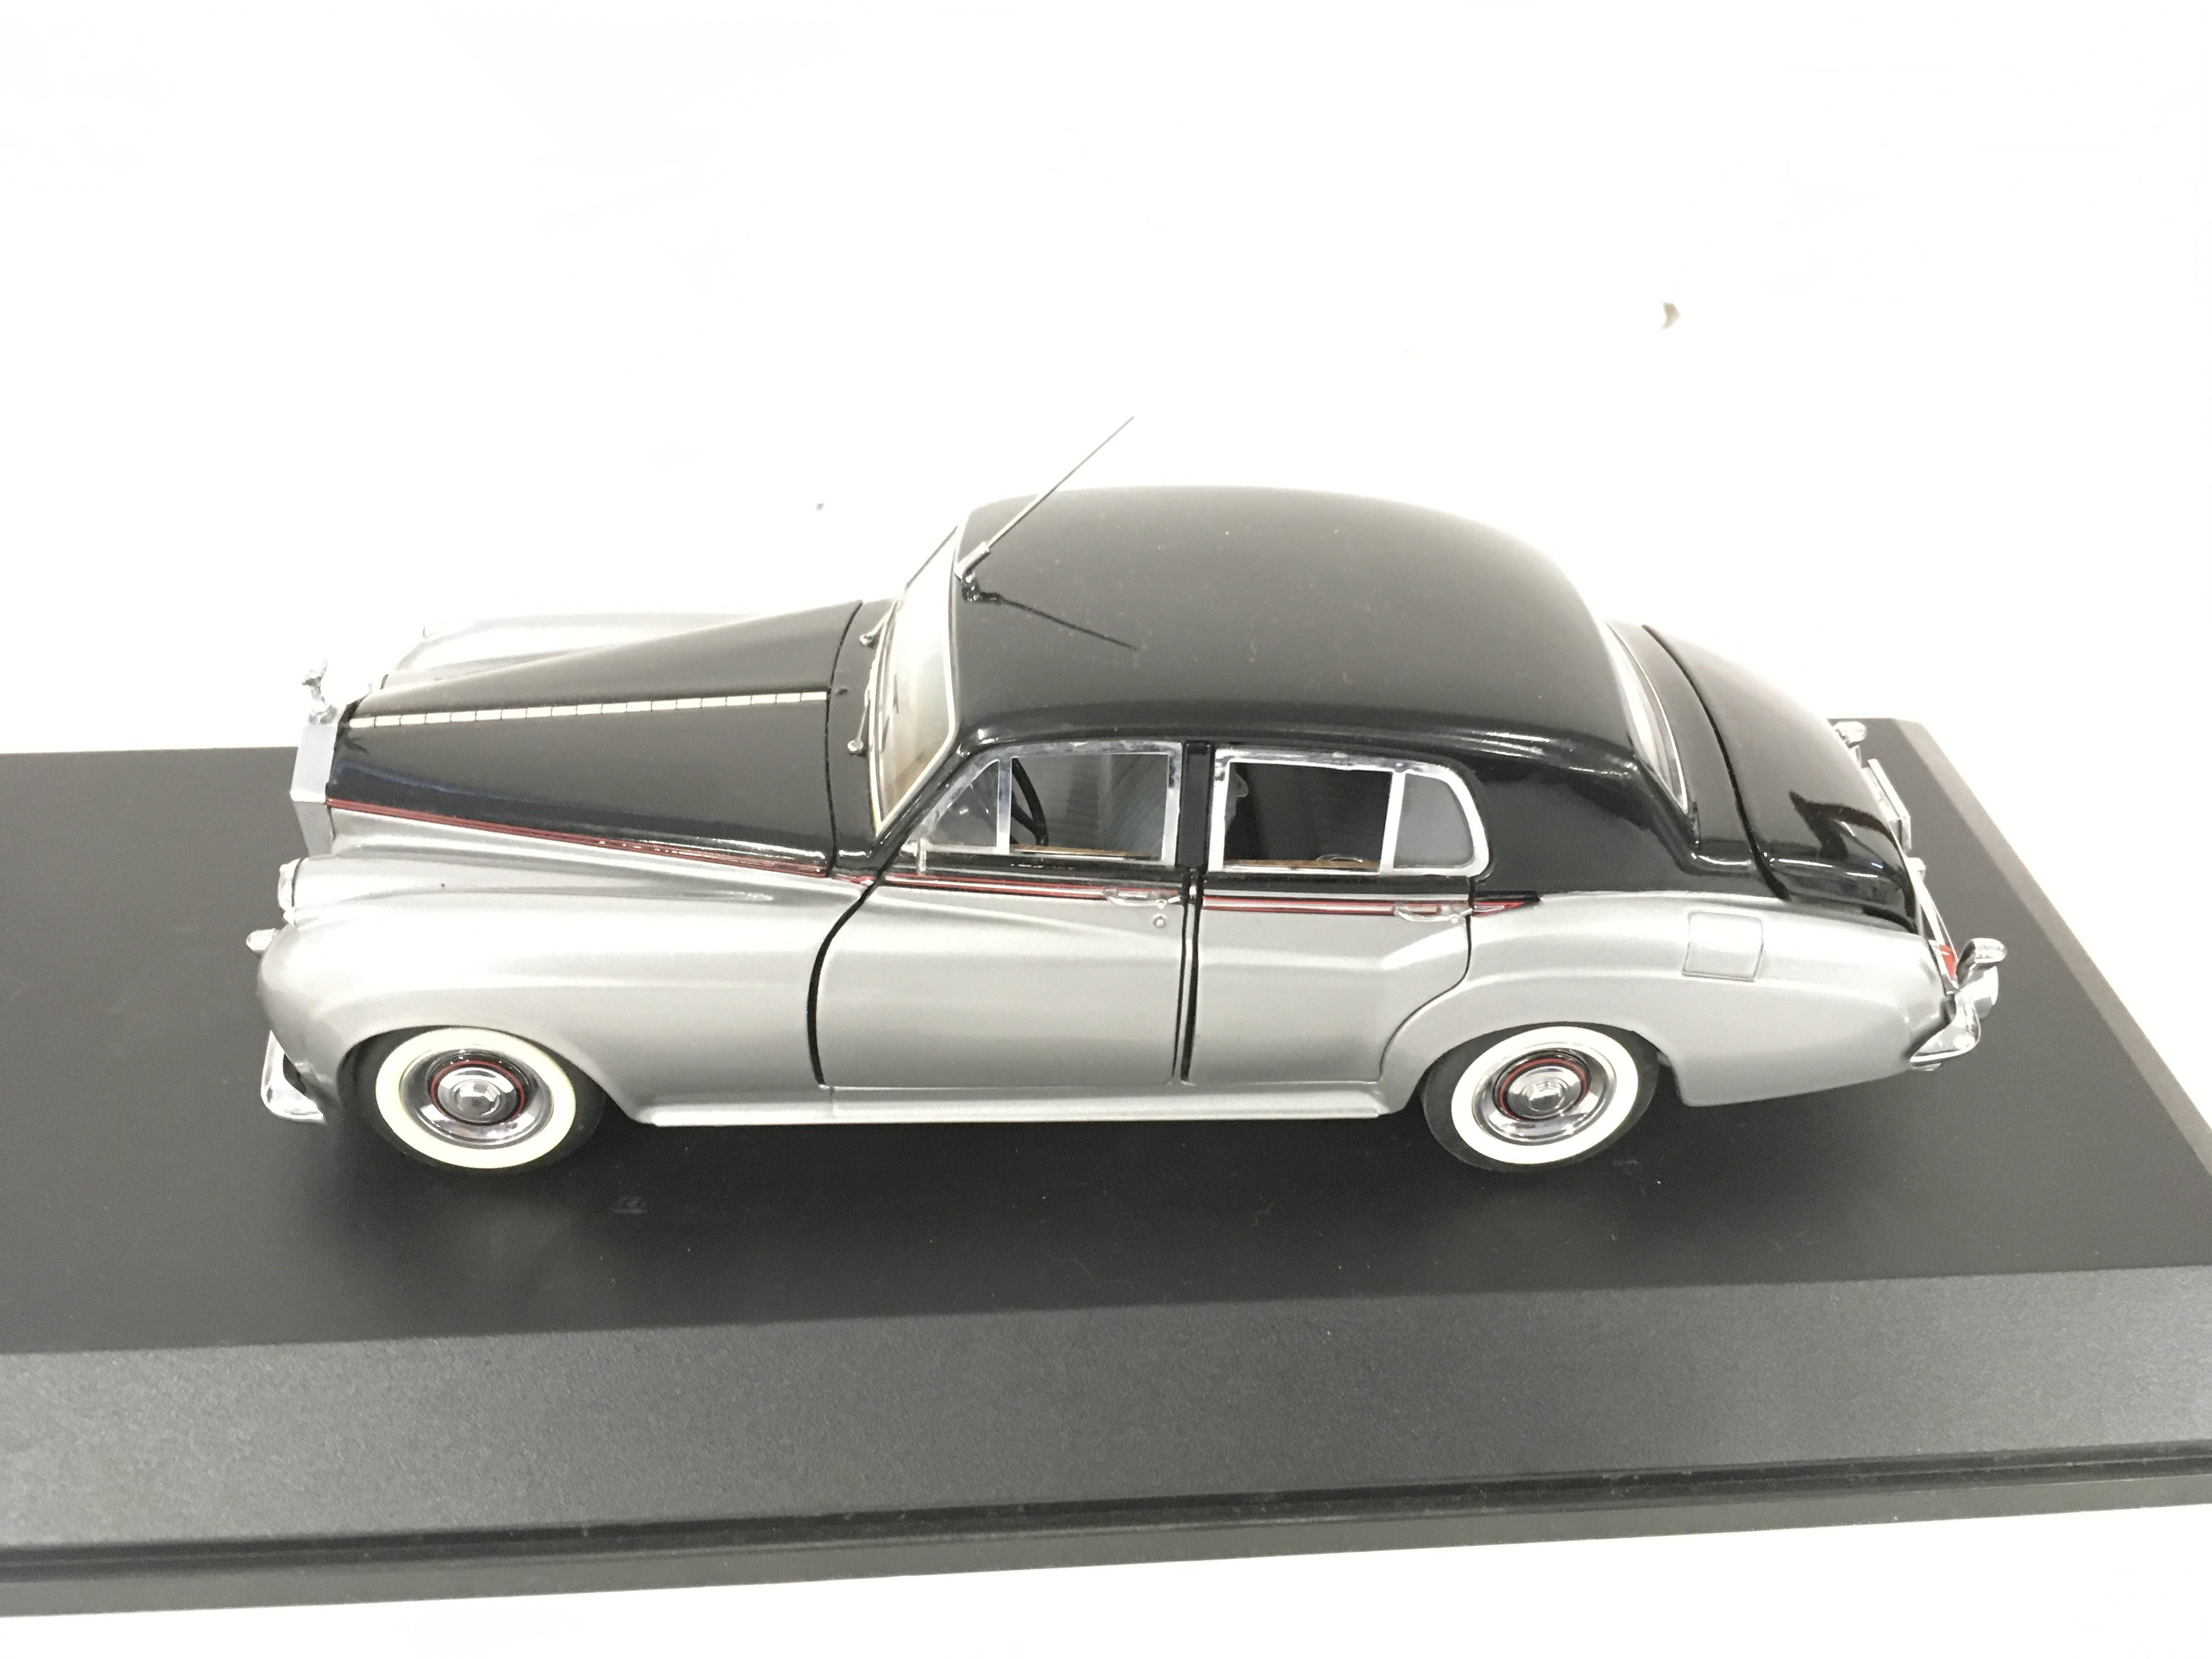 Three precision model cars by Franklin Mint both in presentation cases. Cars are 2 x RollsRoyce - Image 3 of 10